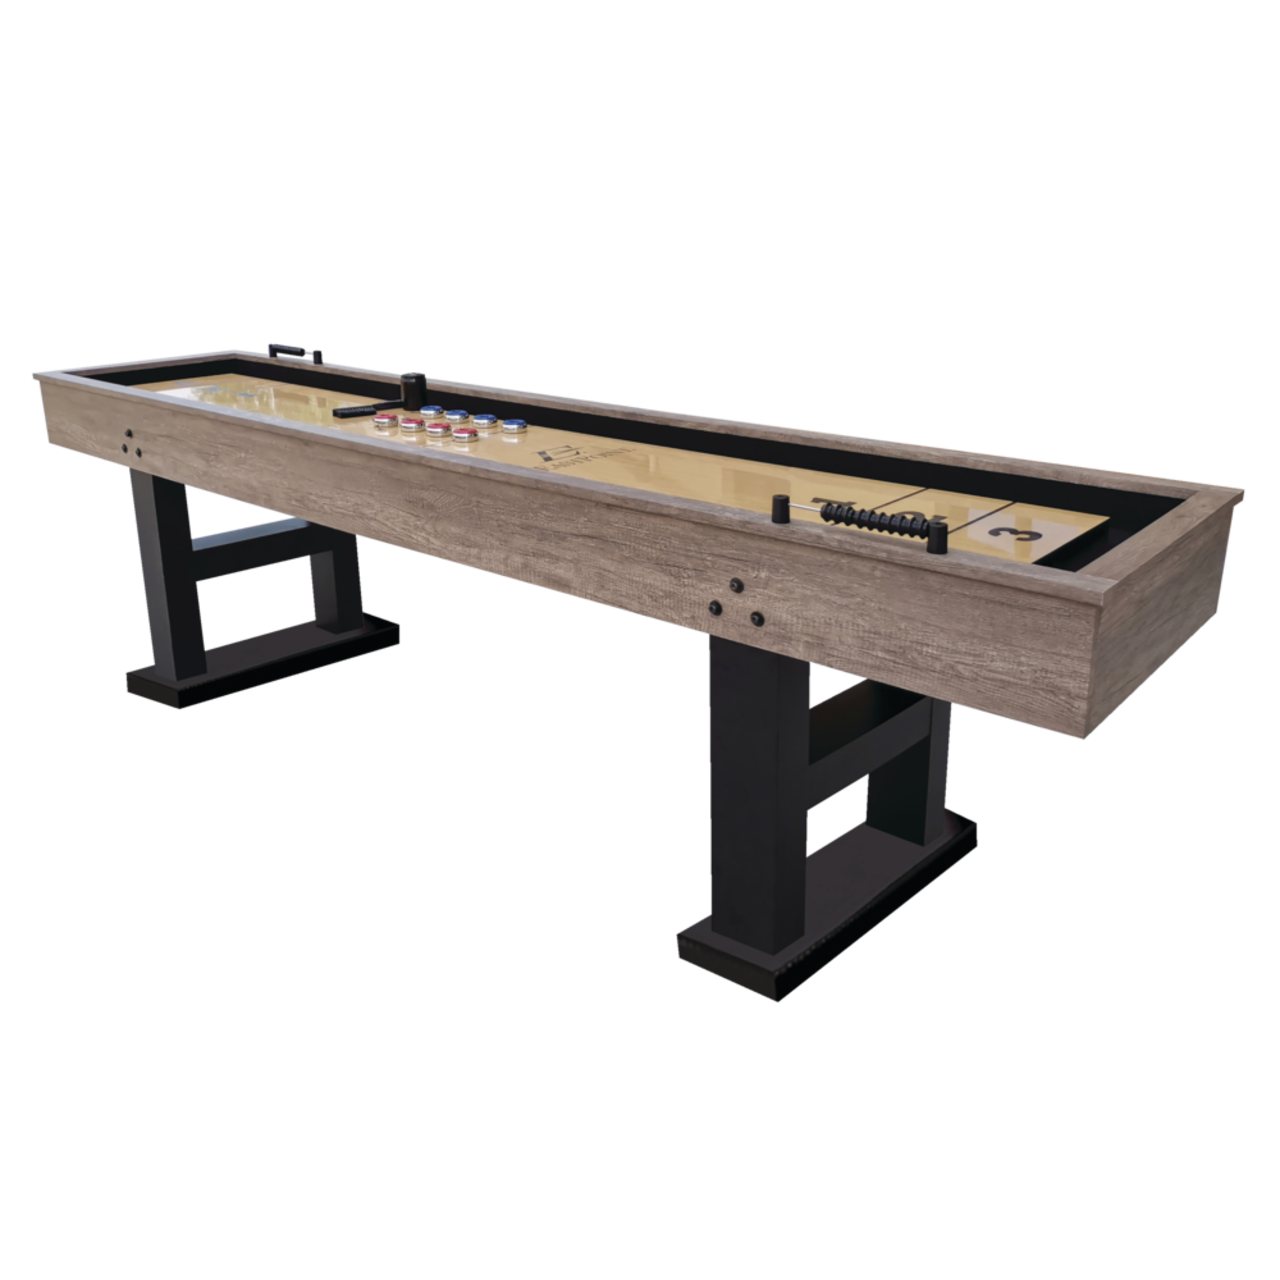 https://media-www.canadiantire.ca/product/playing/team-sports-and-golf/indoor-games/1841286/eastpoint-sports-9-shuffleboard-table-f83adc05-58bc-4f52-bedb-642611dcc0cf.png?imdensity=1&imwidth=1244&impolicy=mZoom